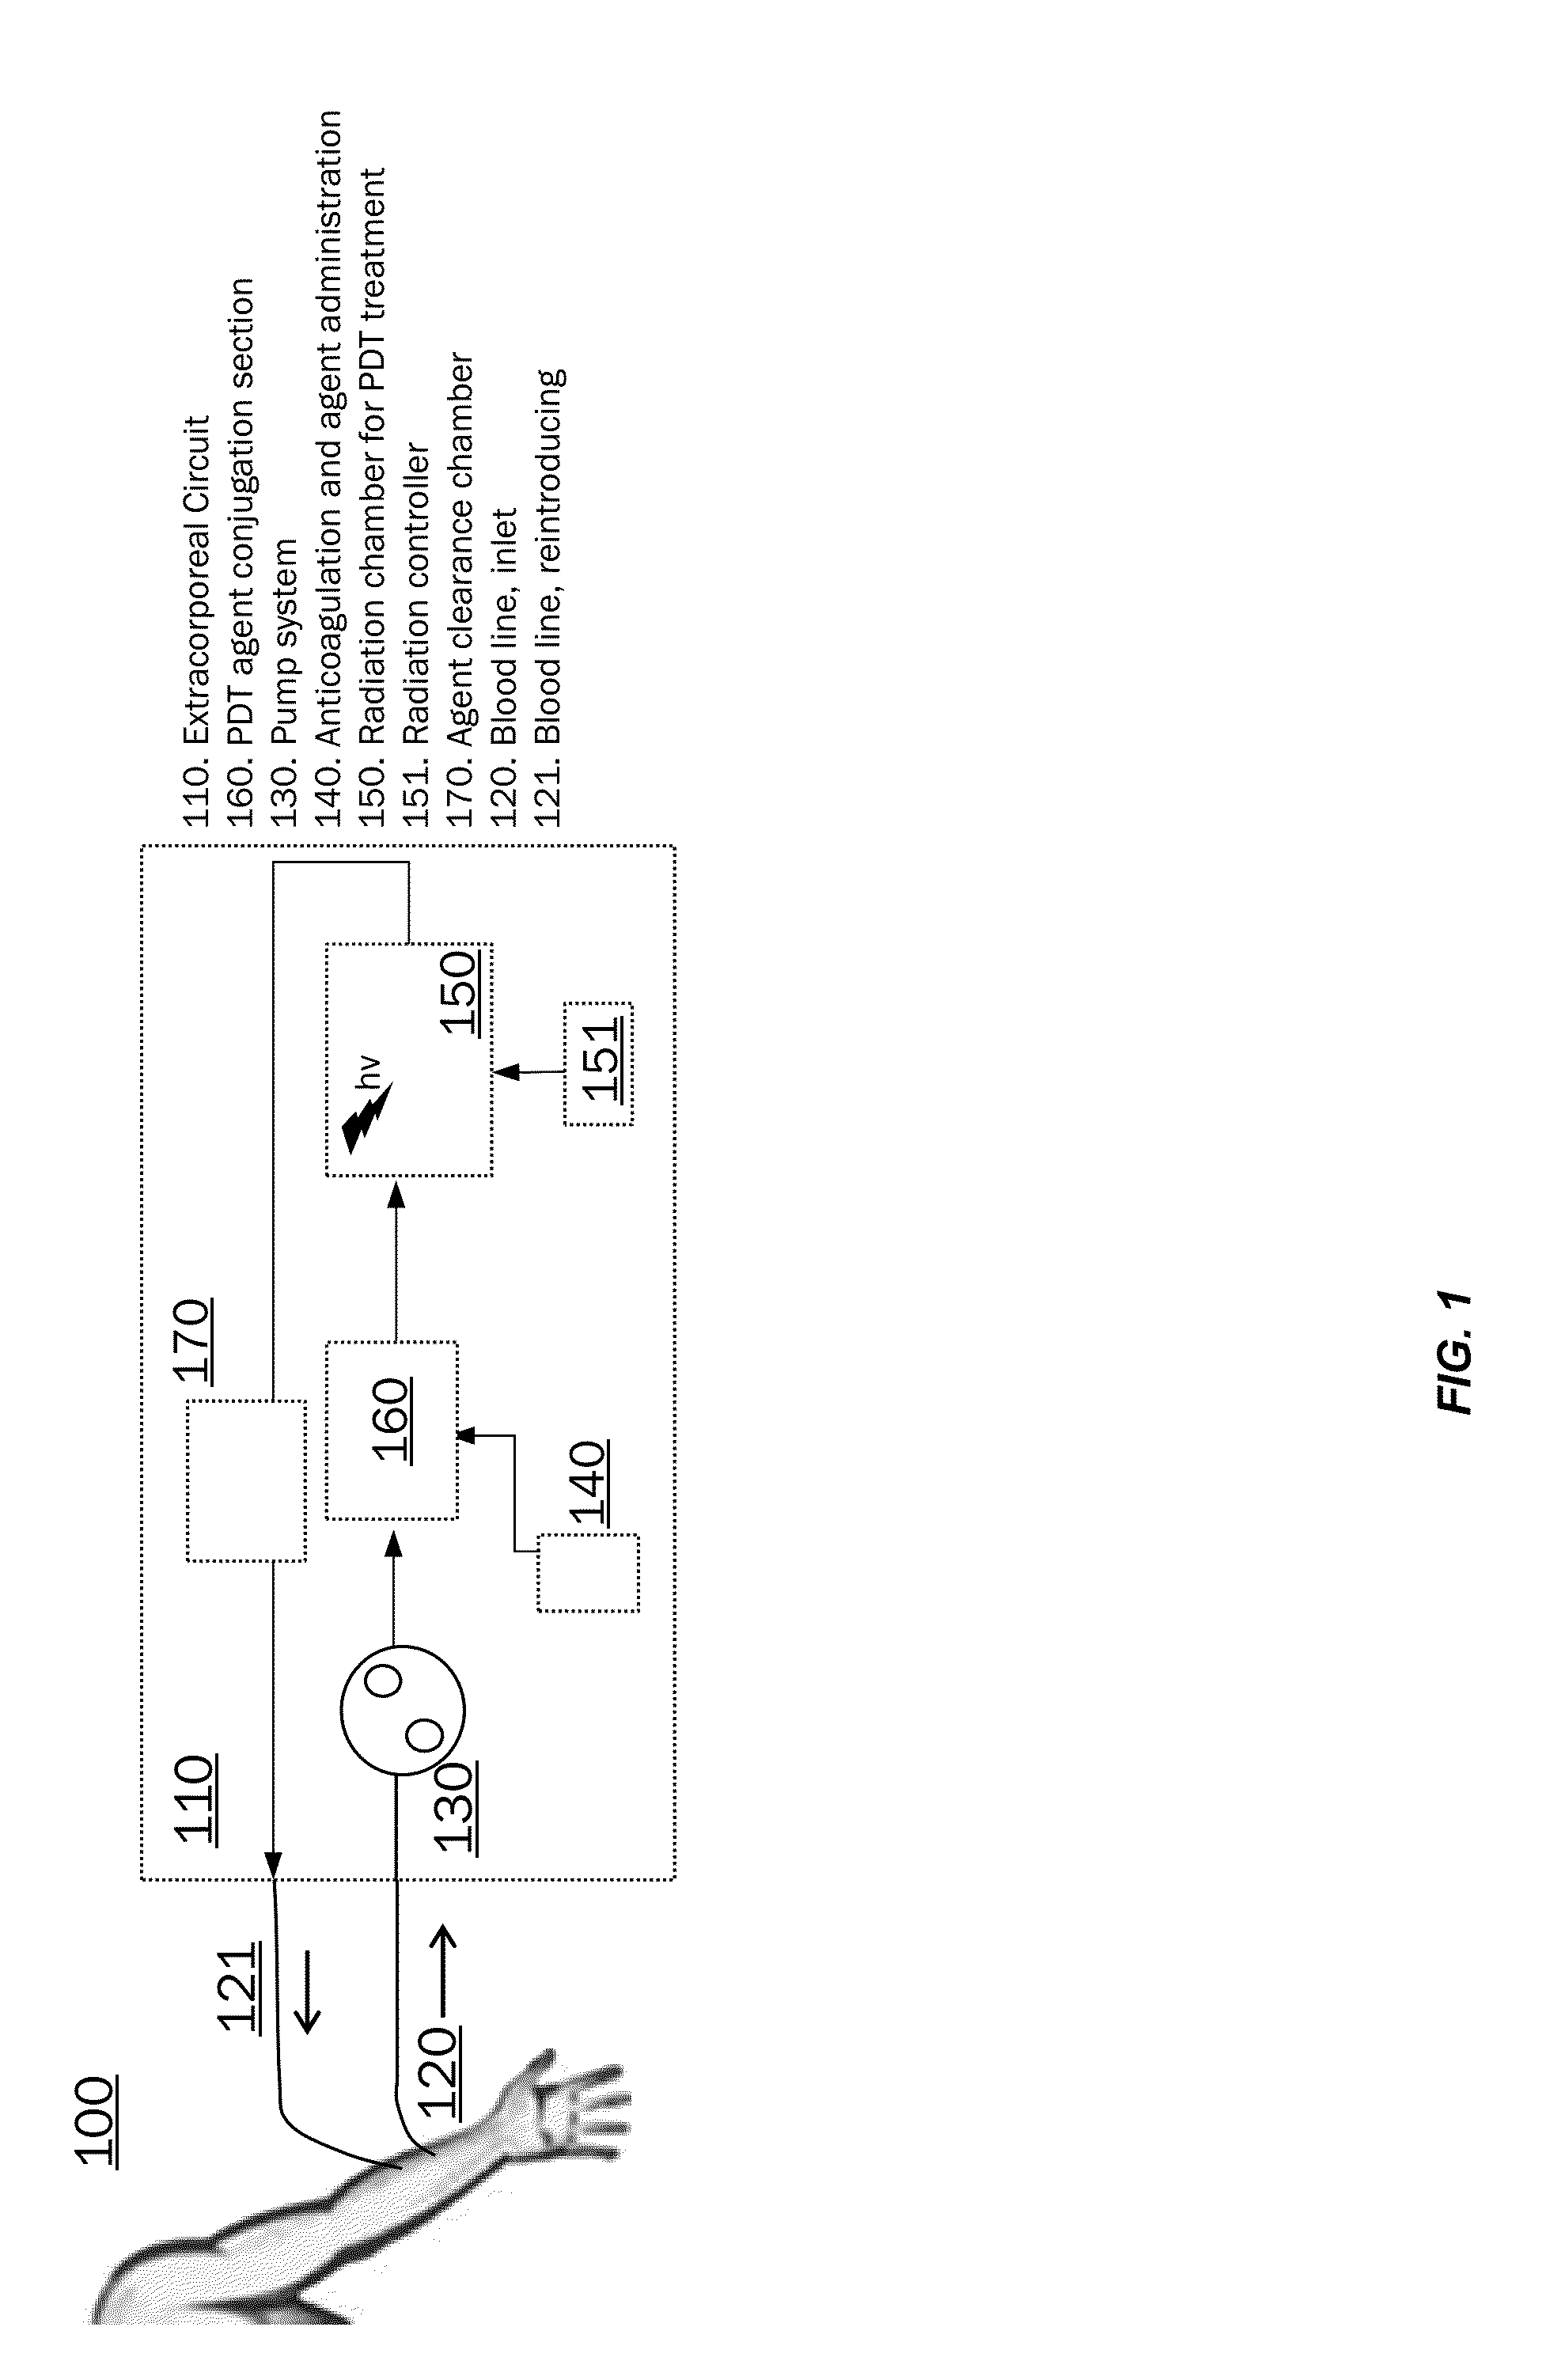 Treatment of circulating tumor cells using an extracorporeal device